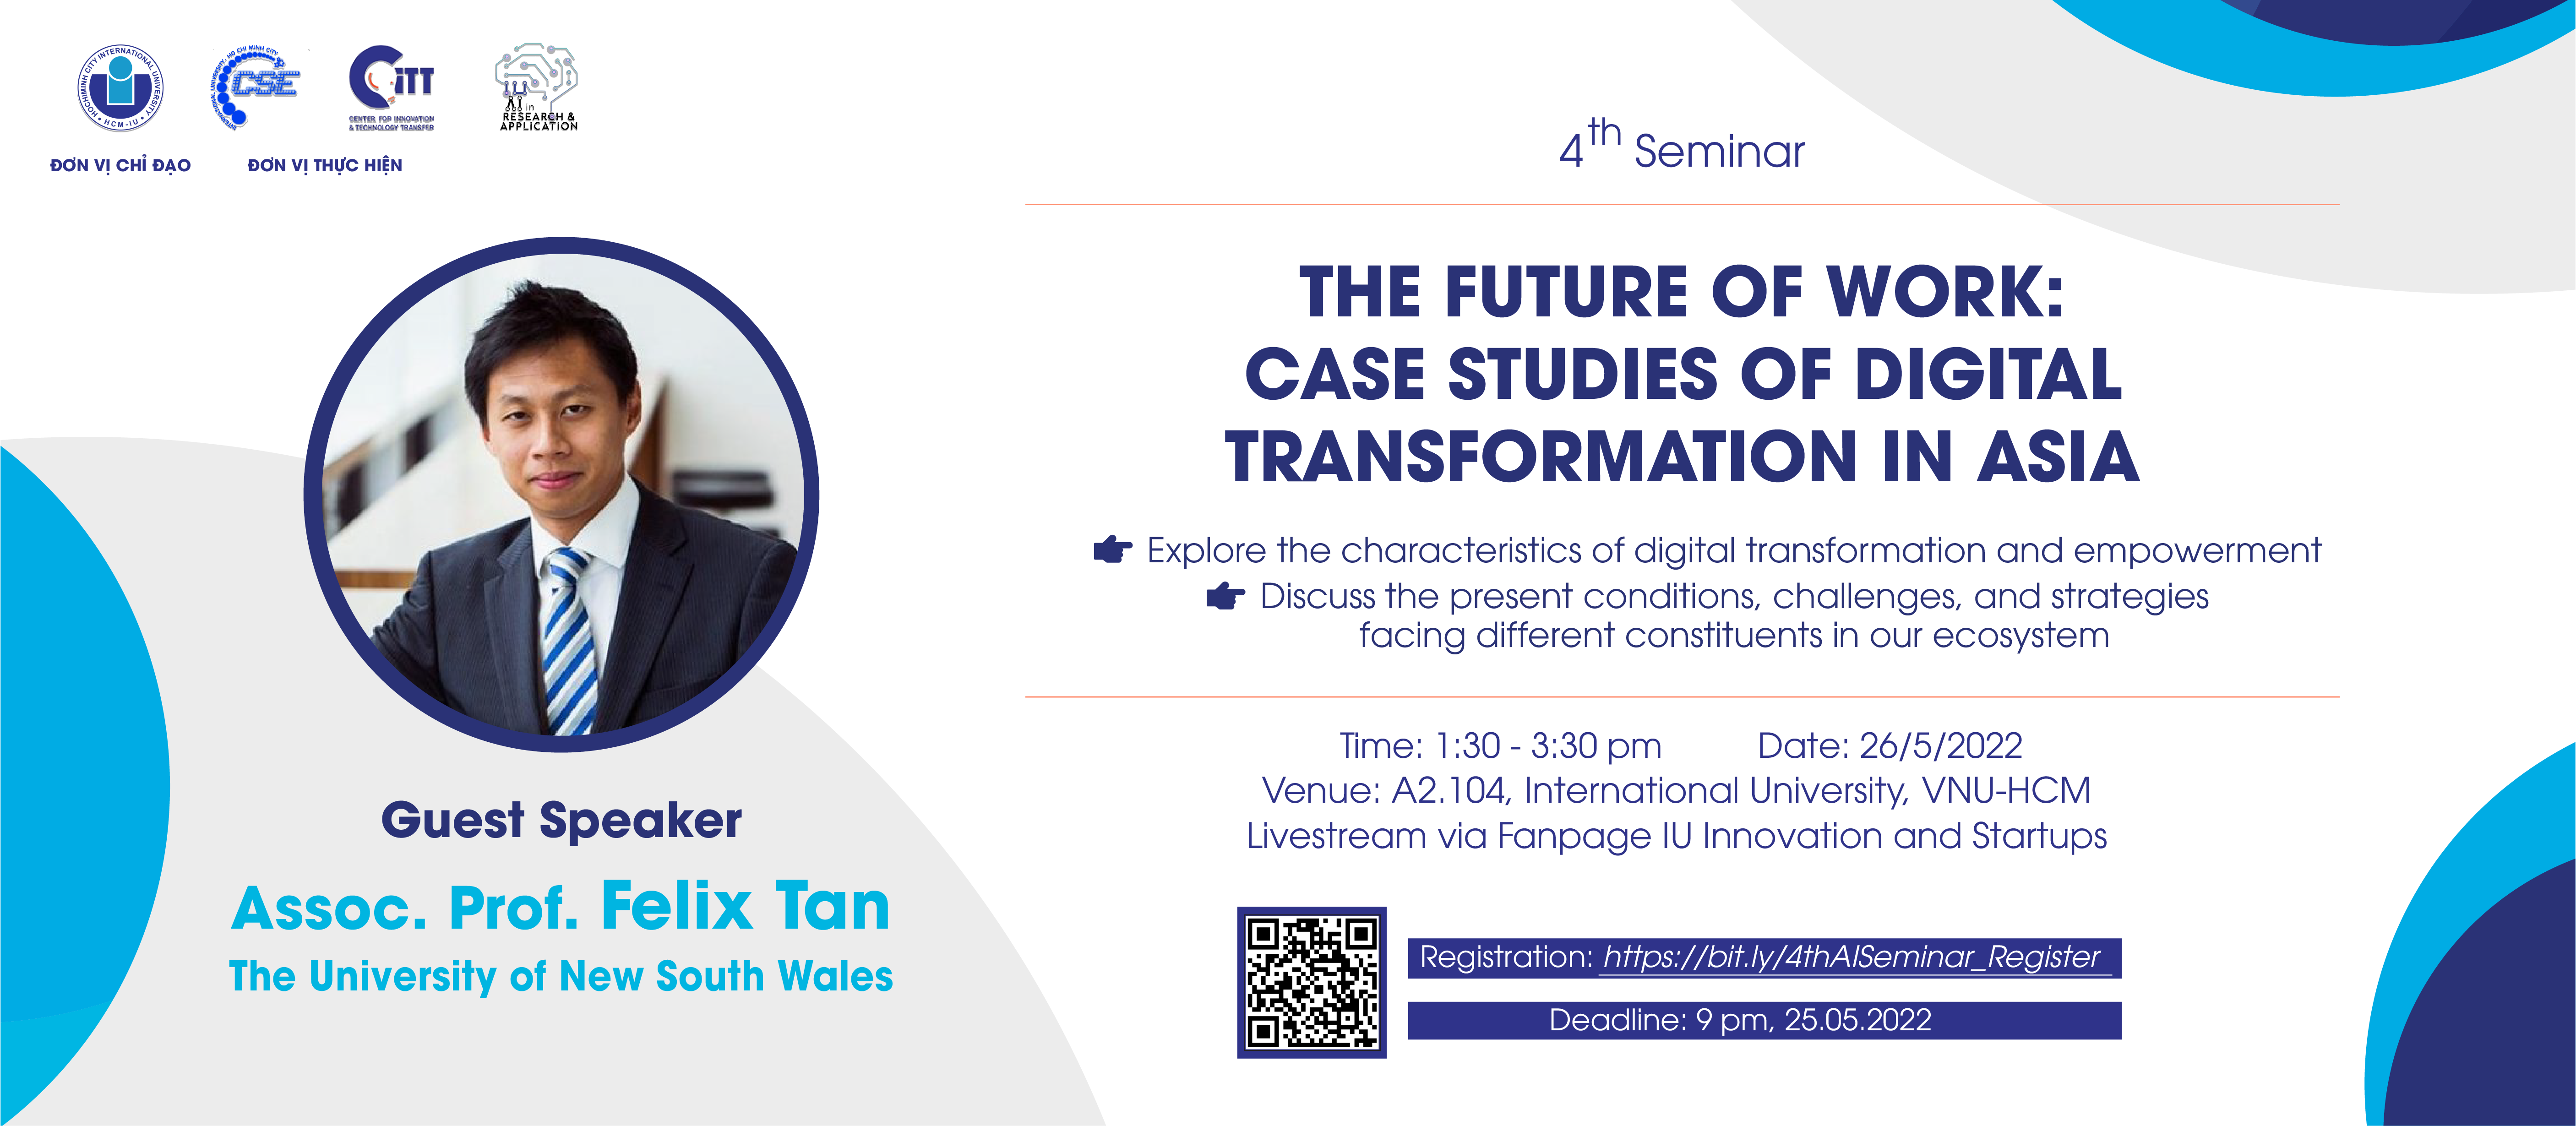 4th Seminar: The Future of Work: Case Studies of Digital Transformation in Asia